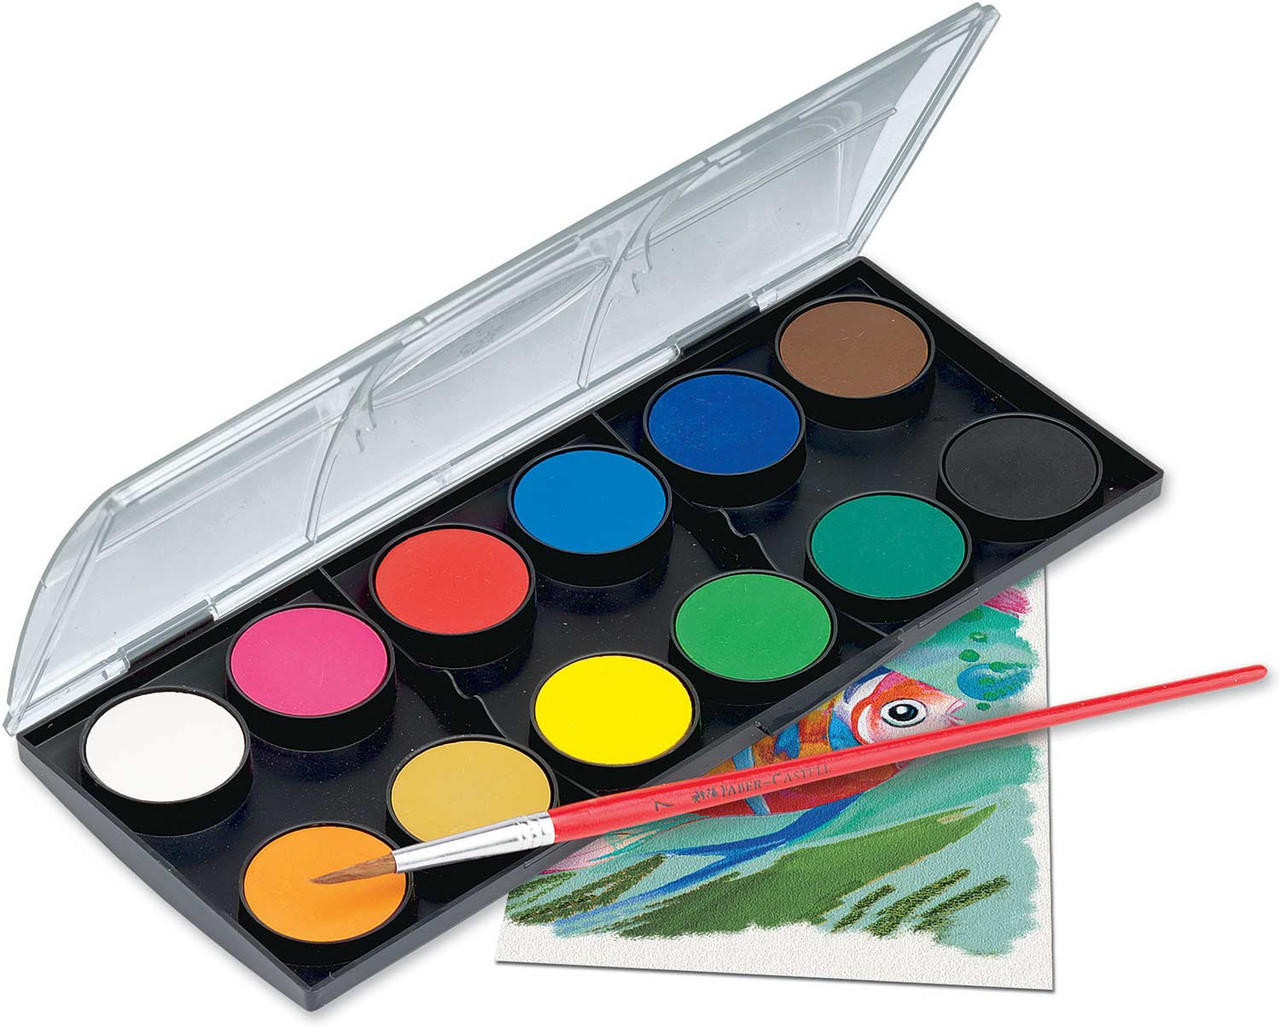 Koi Watercolor 60-Color Studio Set with 2 Water Brushes